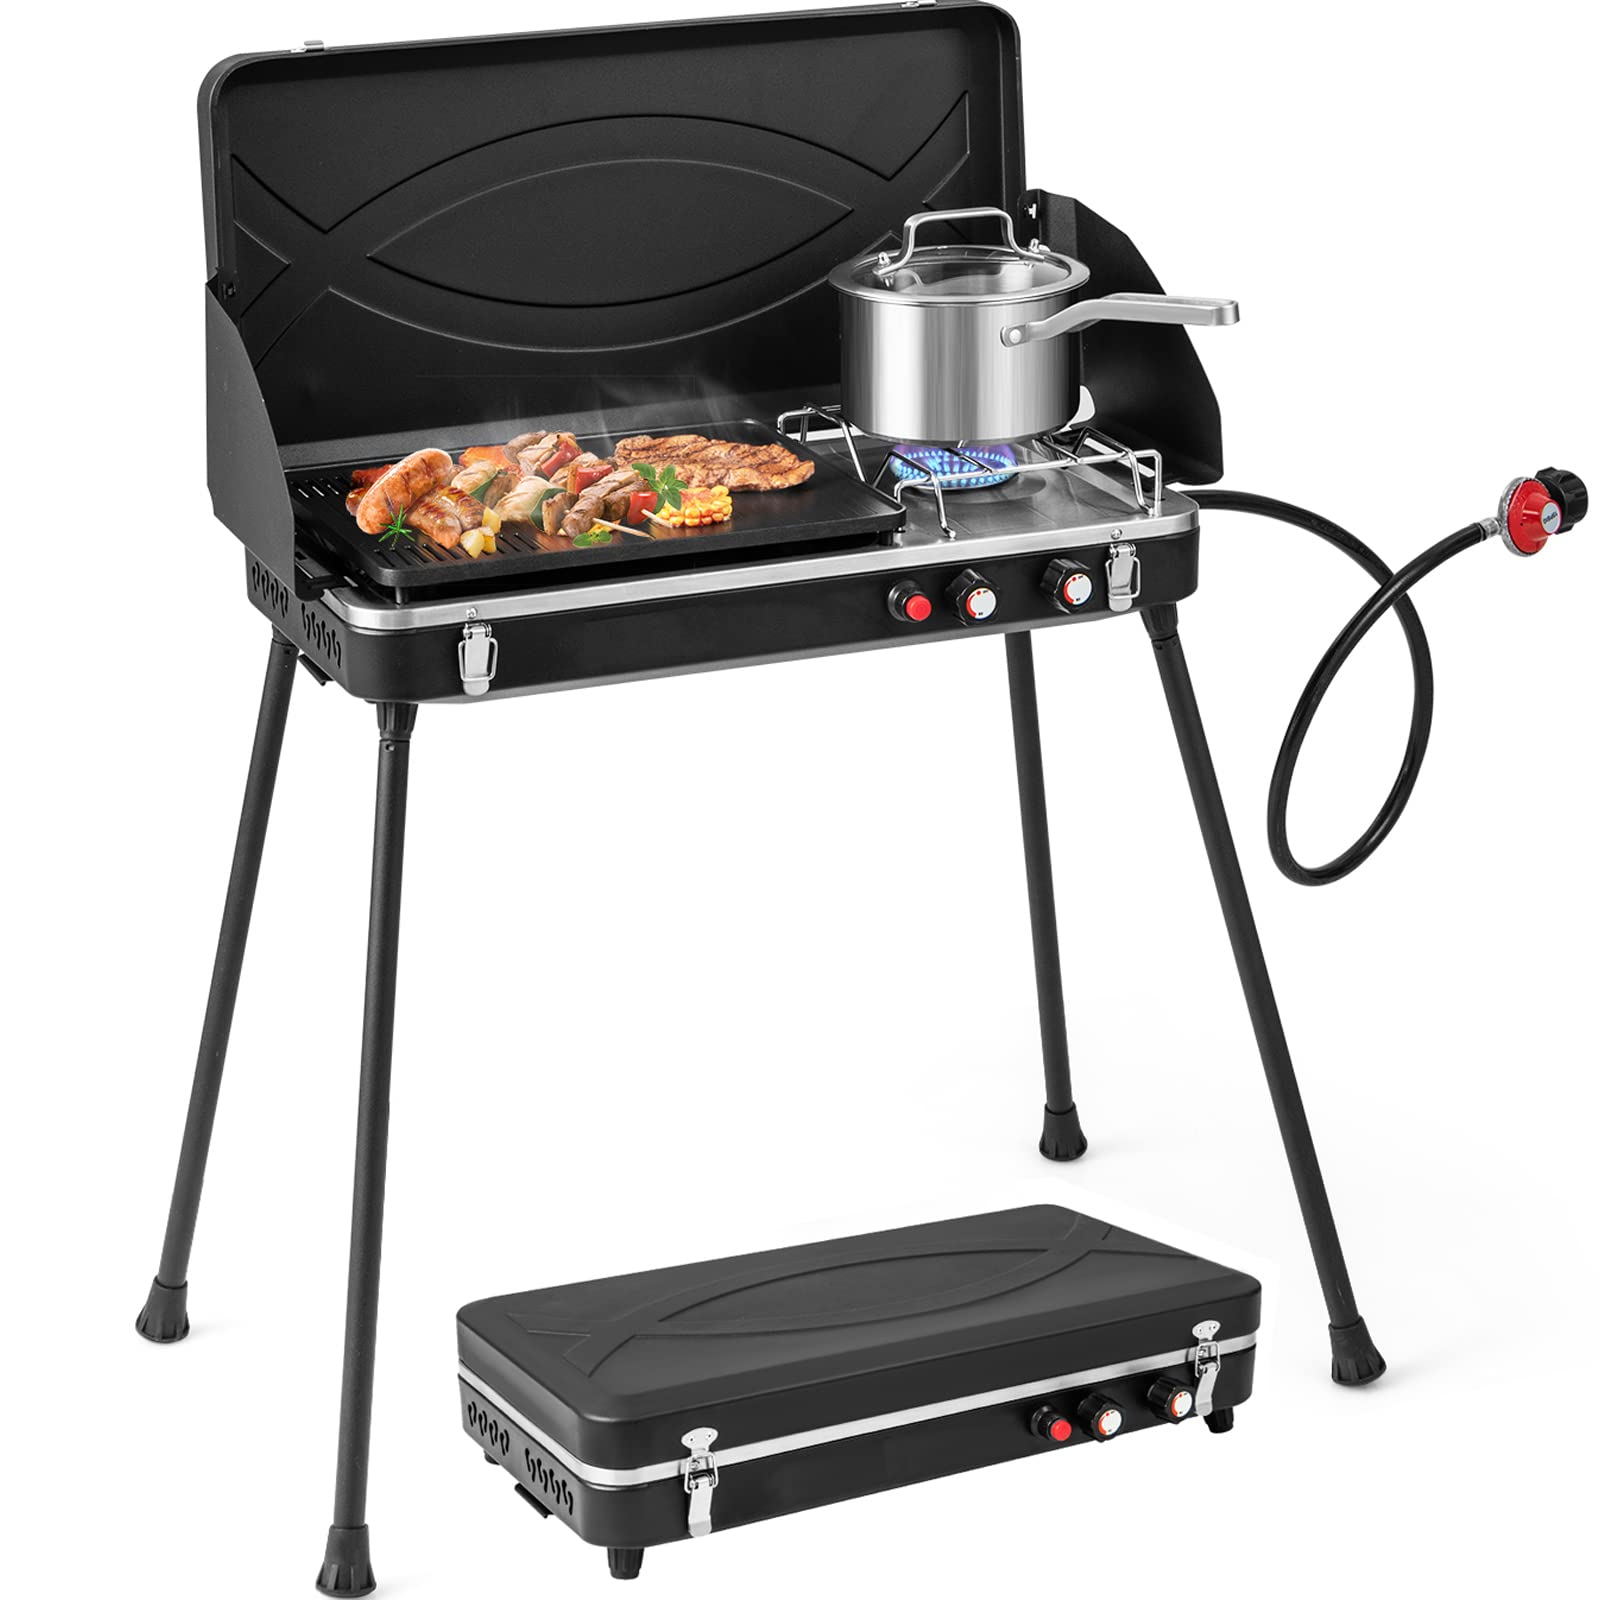 Giantex 2-in-1 Gas Camping Grill and Stove – Giantexus